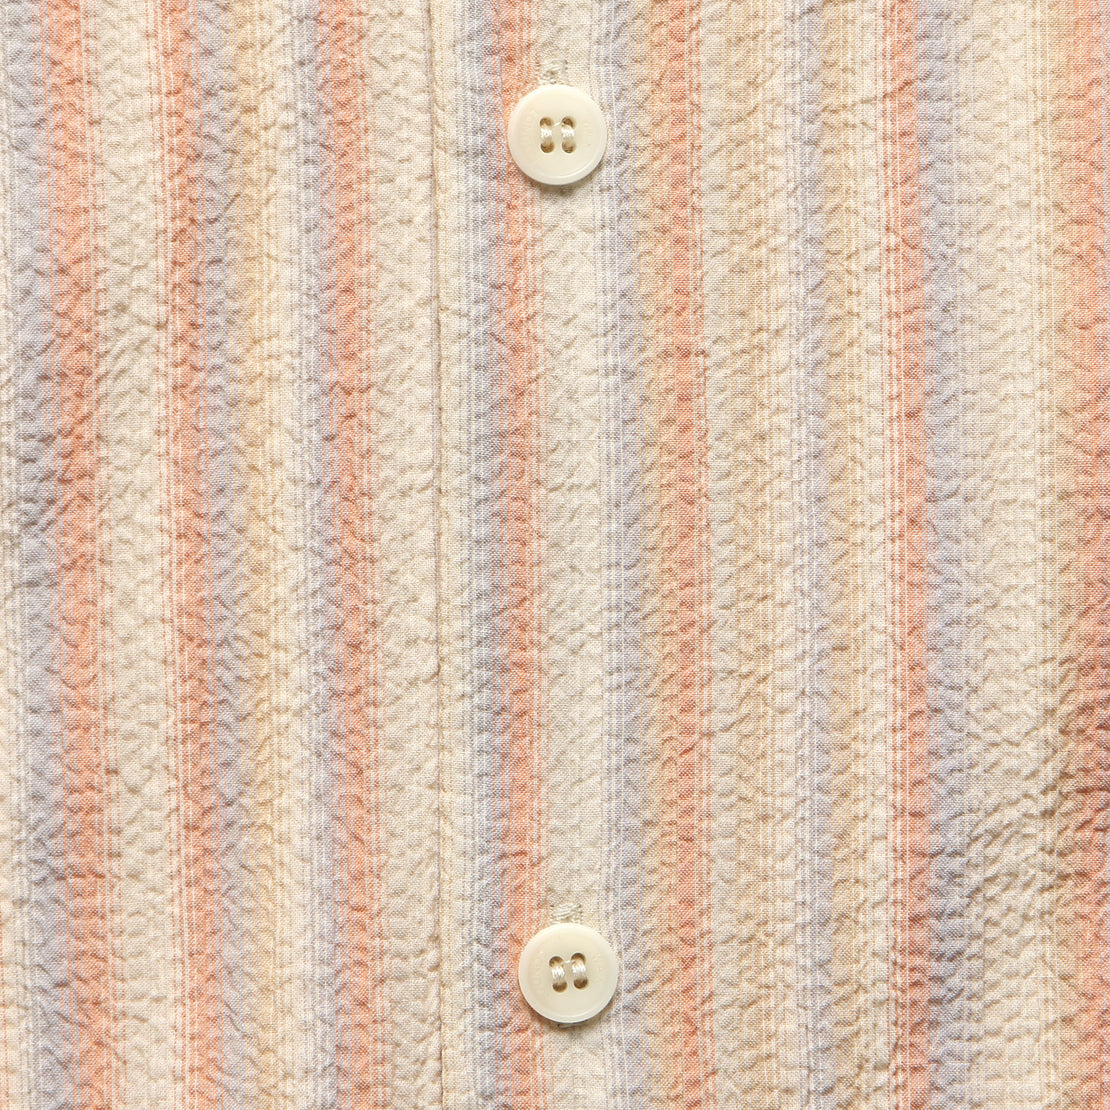 Didcot Pastel Stripe Shirt - Pastel Pink/White - Wax London - STAG Provisions - Tops - S/S Woven - Stripe